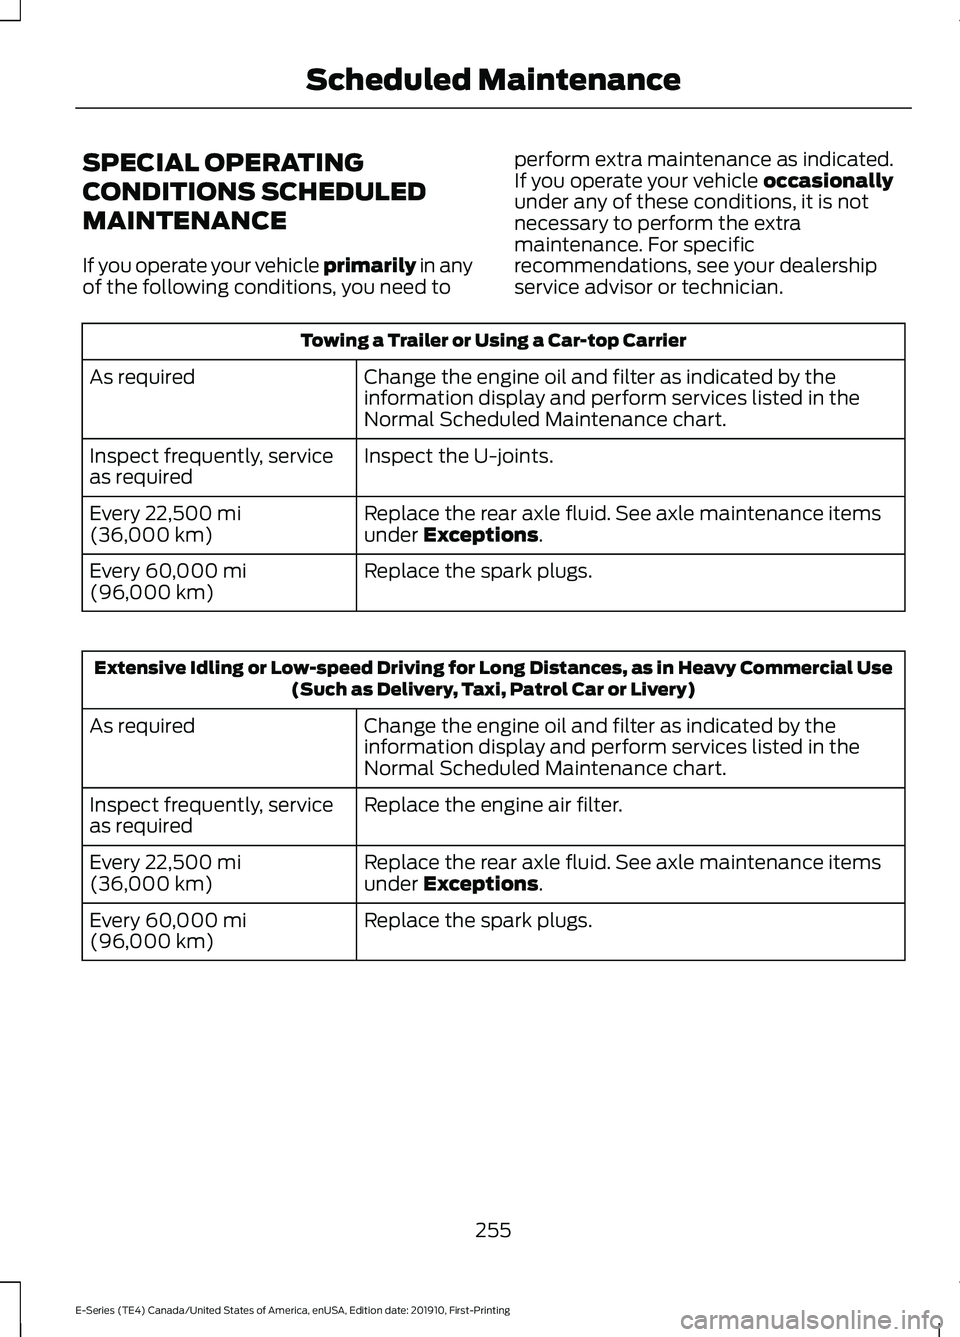 FORD E-450 2021 User Guide SPECIAL OPERATING
CONDITIONS SCHEDULED
MAINTENANCE
If you operate your vehicle primarily in any
of the following conditions, you need to perform extra maintenance as indicated.
If you operate your veh